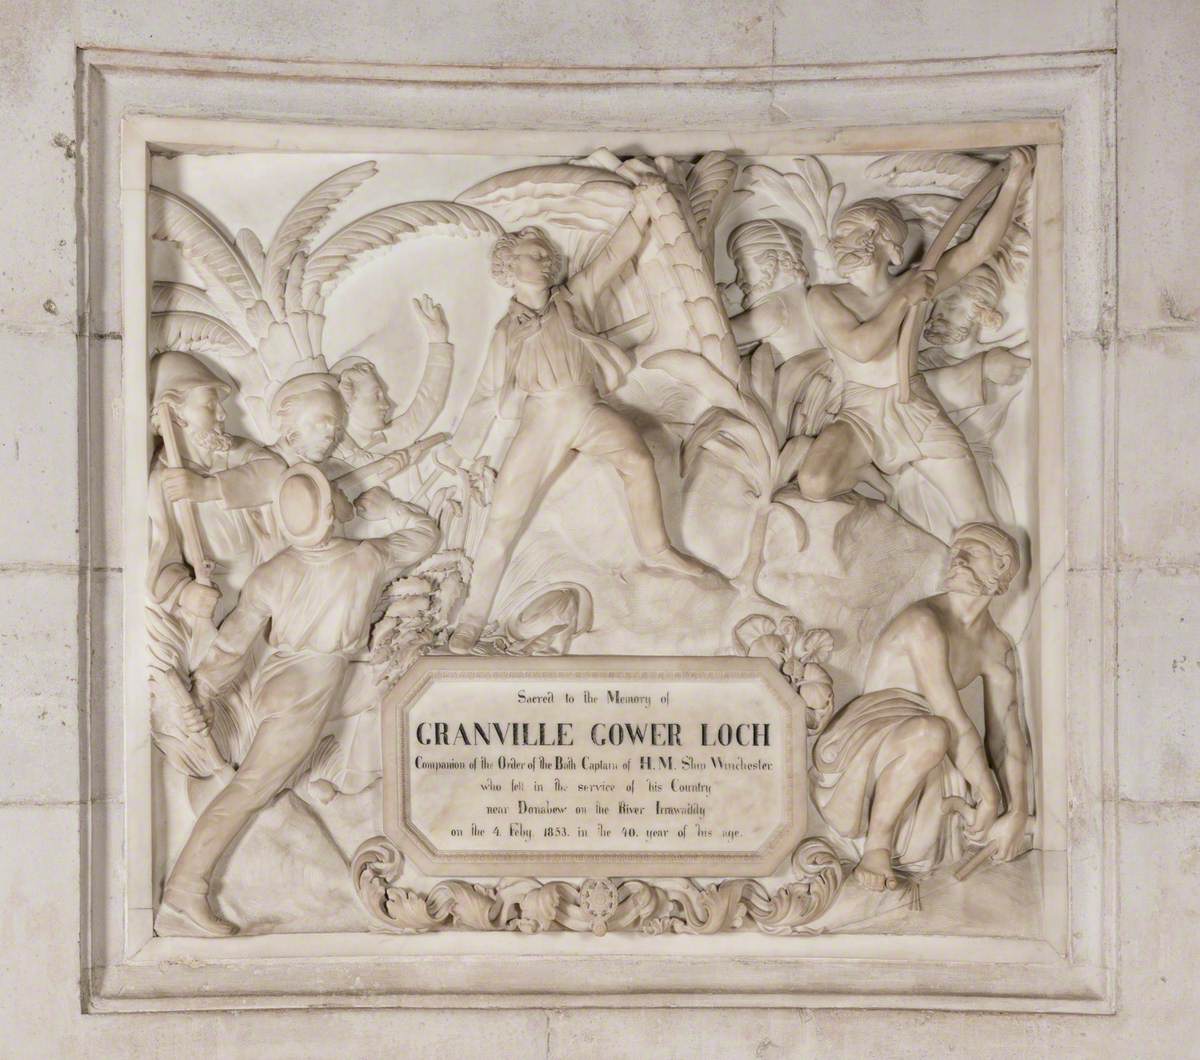 Monument to Captain Granville Gower Loch (1813–1853)